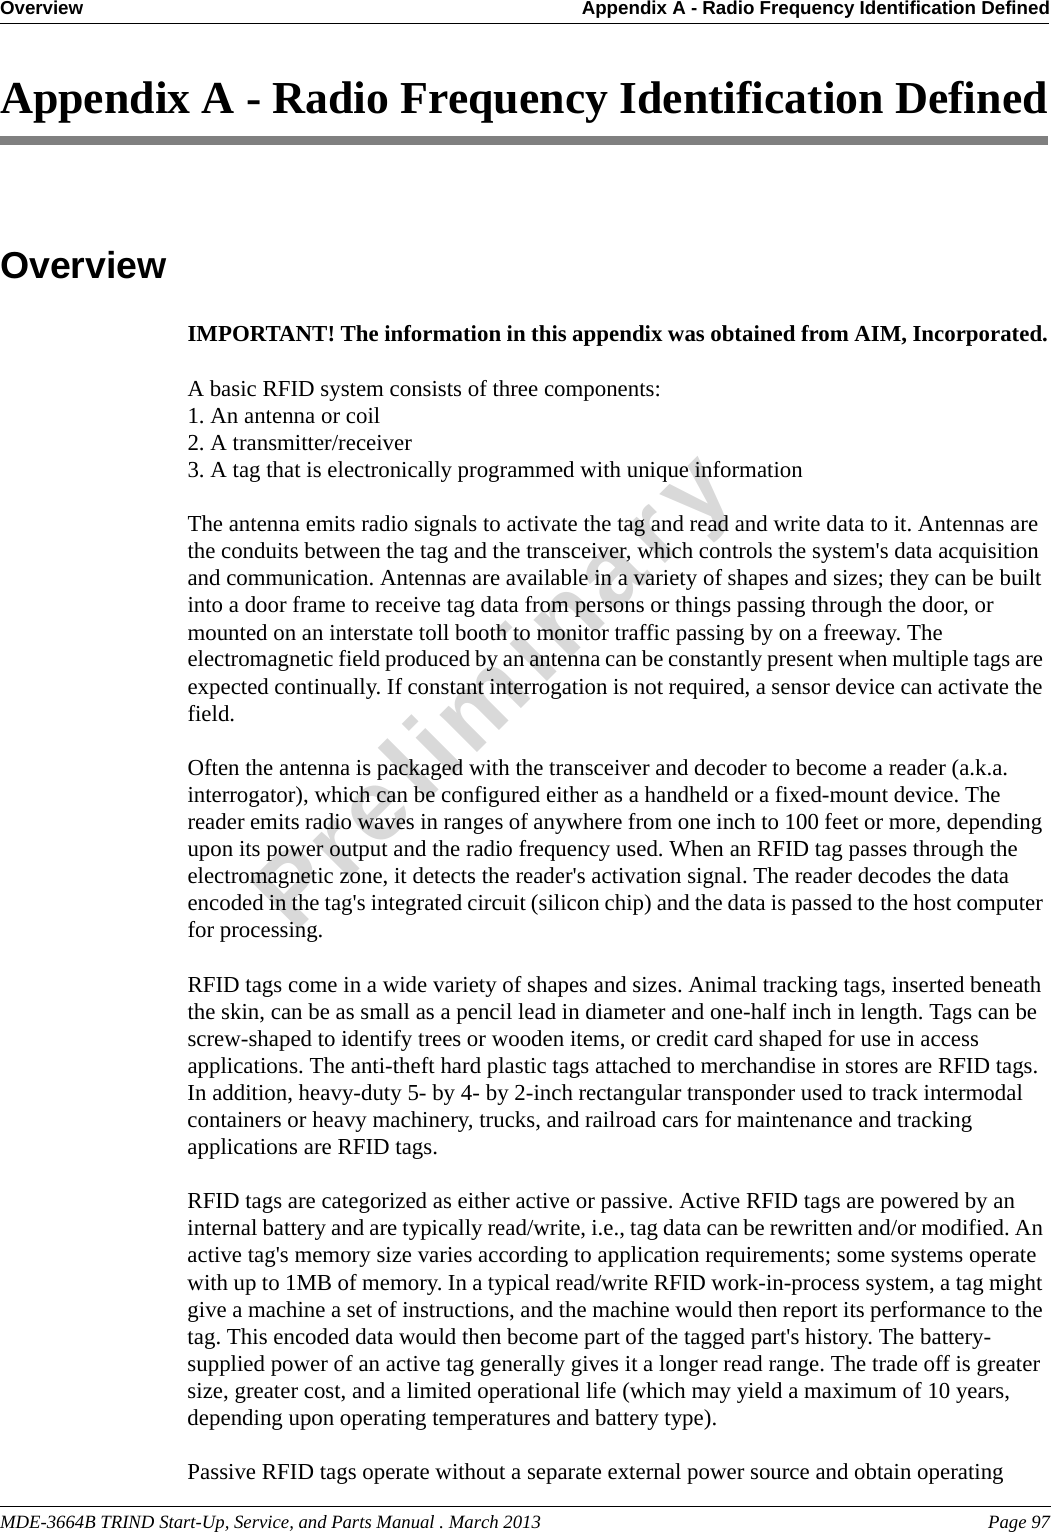 MDE-3664B TRIND Start-Up, Service, and Parts Manual . March 2013 Page 97Overview Appendix A - Radio Frequency Identification DefinedPreliminaryAppendix A - Radio Frequency Identification DefinedOverviewIMPORTANT! The information in this appendix was obtained from AIM, Incorporated.A basic RFID system consists of three components: 1. An antenna or coil2. A transmitter/receiver 3. A tag that is electronically programmed with unique informationThe antenna emits radio signals to activate the tag and read and write data to it. Antennas are the conduits between the tag and the transceiver, which controls the system&apos;s data acquisition and communication. Antennas are available in a variety of shapes and sizes; they can be built into a door frame to receive tag data from persons or things passing through the door, or mounted on an interstate toll booth to monitor traffic passing by on a freeway. The electromagnetic field produced by an antenna can be constantly present when multiple tags are expected continually. If constant interrogation is not required, a sensor device can activate the field. Often the antenna is packaged with the transceiver and decoder to become a reader (a.k.a. interrogator), which can be configured either as a handheld or a fixed-mount device. The reader emits radio waves in ranges of anywhere from one inch to 100 feet or more, depending upon its power output and the radio frequency used. When an RFID tag passes through the electromagnetic zone, it detects the reader&apos;s activation signal. The reader decodes the data encoded in the tag&apos;s integrated circuit (silicon chip) and the data is passed to the host computer for processing.RFID tags come in a wide variety of shapes and sizes. Animal tracking tags, inserted beneath the skin, can be as small as a pencil lead in diameter and one-half inch in length. Tags can be screw-shaped to identify trees or wooden items, or credit card shaped for use in access applications. The anti-theft hard plastic tags attached to merchandise in stores are RFID tags. In addition, heavy-duty 5- by 4- by 2-inch rectangular transponder used to track intermodal containers or heavy machinery, trucks, and railroad cars for maintenance and tracking applications are RFID tags.RFID tags are categorized as either active or passive. Active RFID tags are powered by an internal battery and are typically read/write, i.e., tag data can be rewritten and/or modified. An active tag&apos;s memory size varies according to application requirements; some systems operate with up to 1MB of memory. In a typical read/write RFID work-in-process system, a tag might give a machine a set of instructions, and the machine would then report its performance to the tag. This encoded data would then become part of the tagged part&apos;s history. The battery-supplied power of an active tag generally gives it a longer read range. The trade off is greater size, greater cost, and a limited operational life (which may yield a maximum of 10 years, depending upon operating temperatures and battery type).Passive RFID tags operate without a separate external power source and obtain operating 